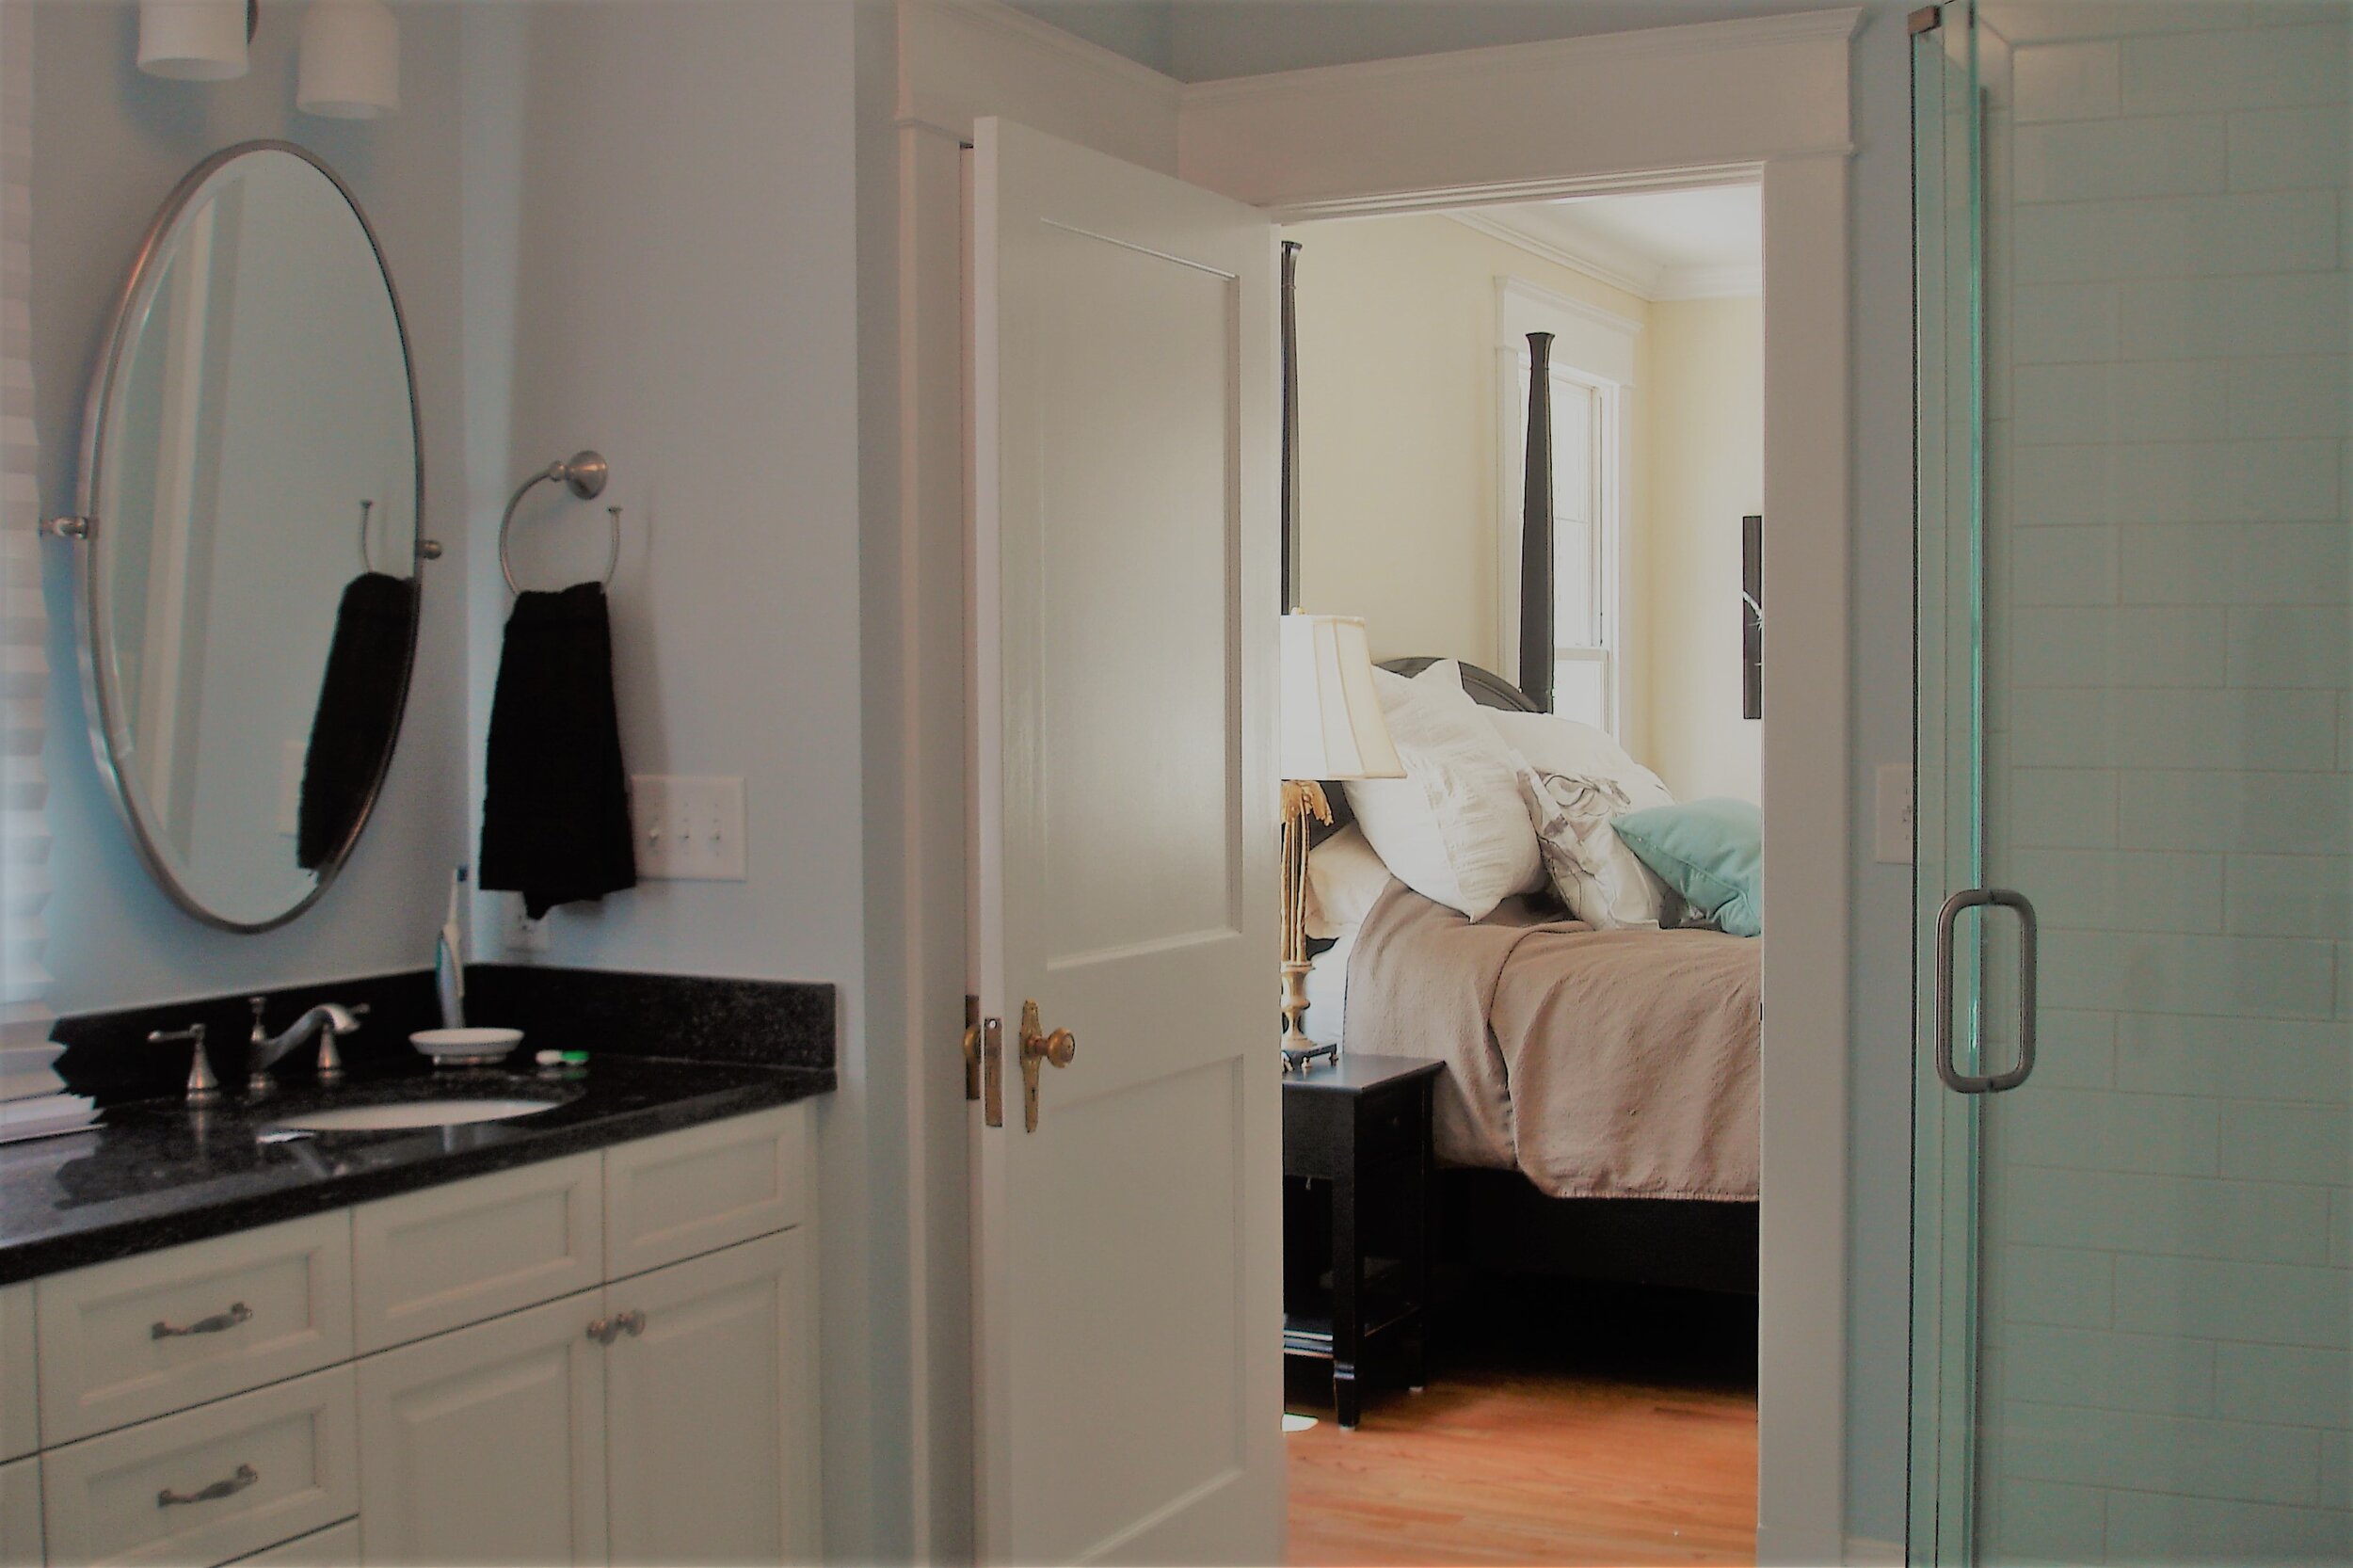 The large master bath includes a spacious vanity with a window and a large walk in shower